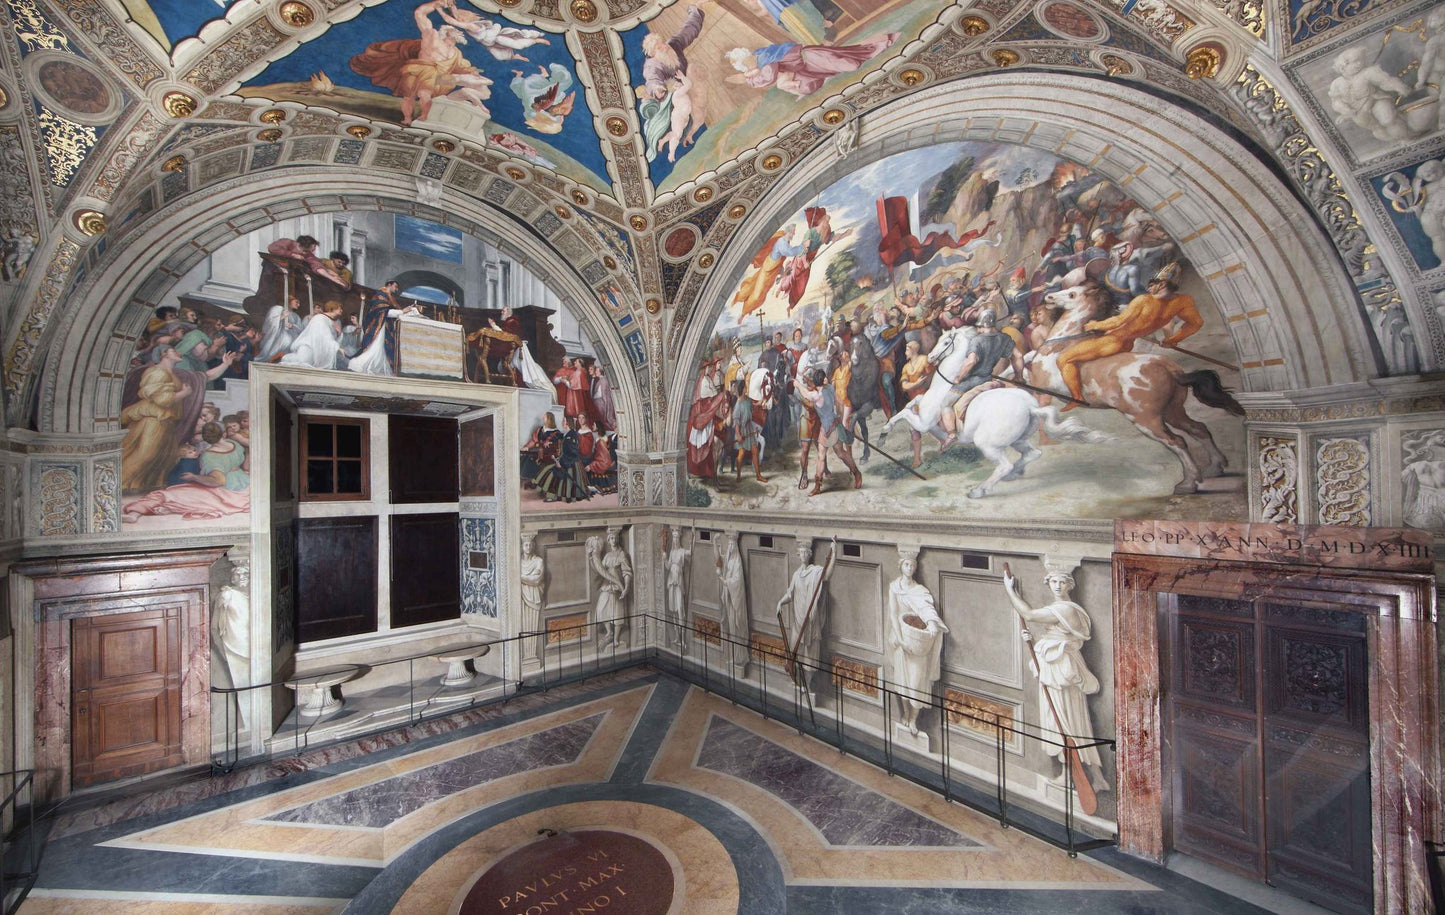 The Rooms of Raphael in the Vatican